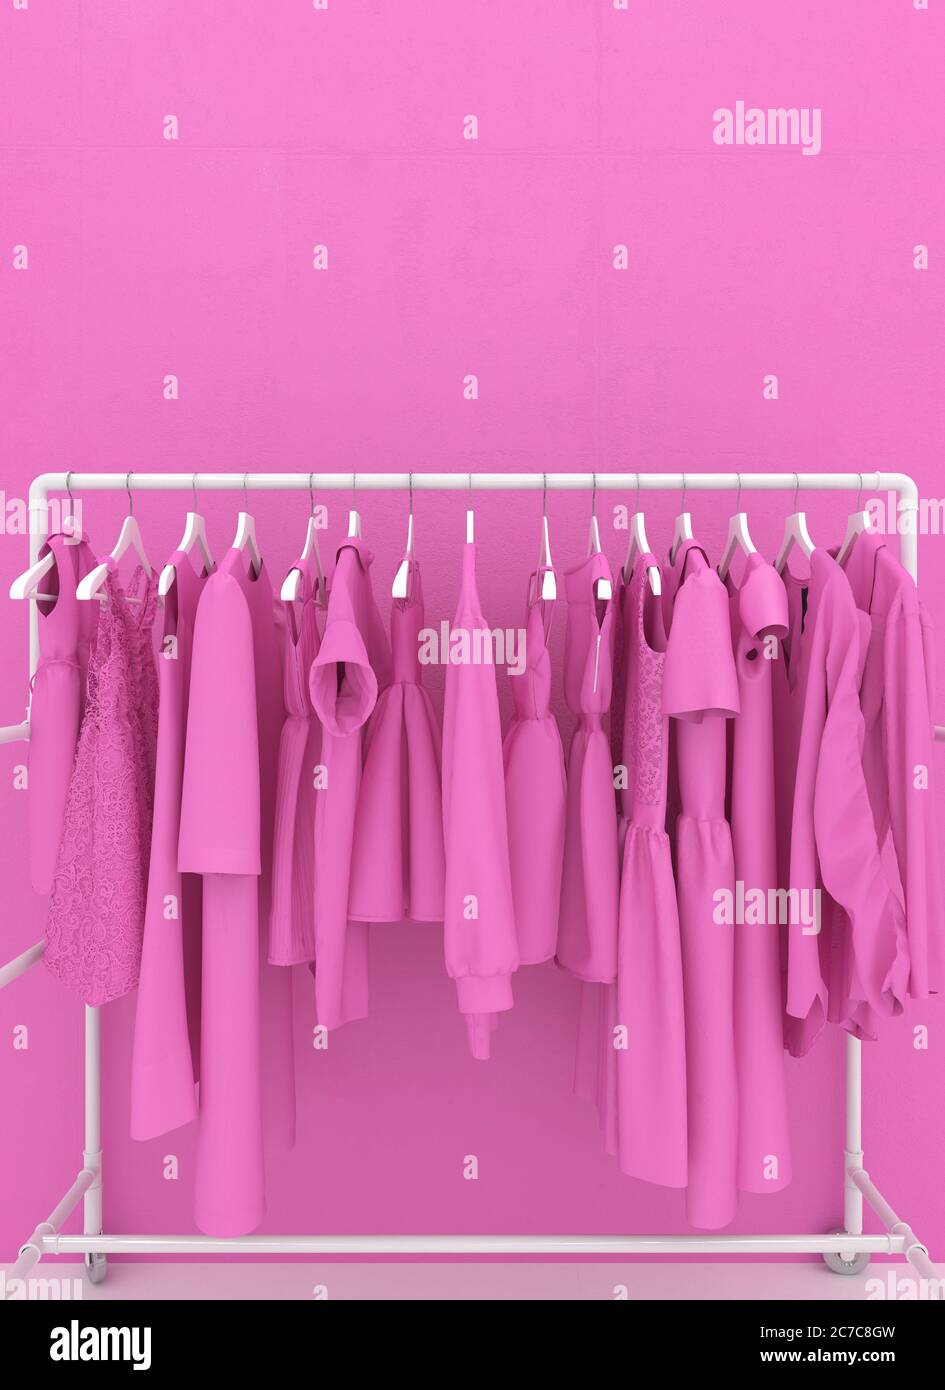 https://c8.alamy.com/comp/2C7C8GW/hanger-with-pink-womens-clothing-against-the-background-of-a-pink-wall-monotonous-pink-clothes-creative-conceptual-illustration-with-copy-space-3d-2C7C8GW.jpg